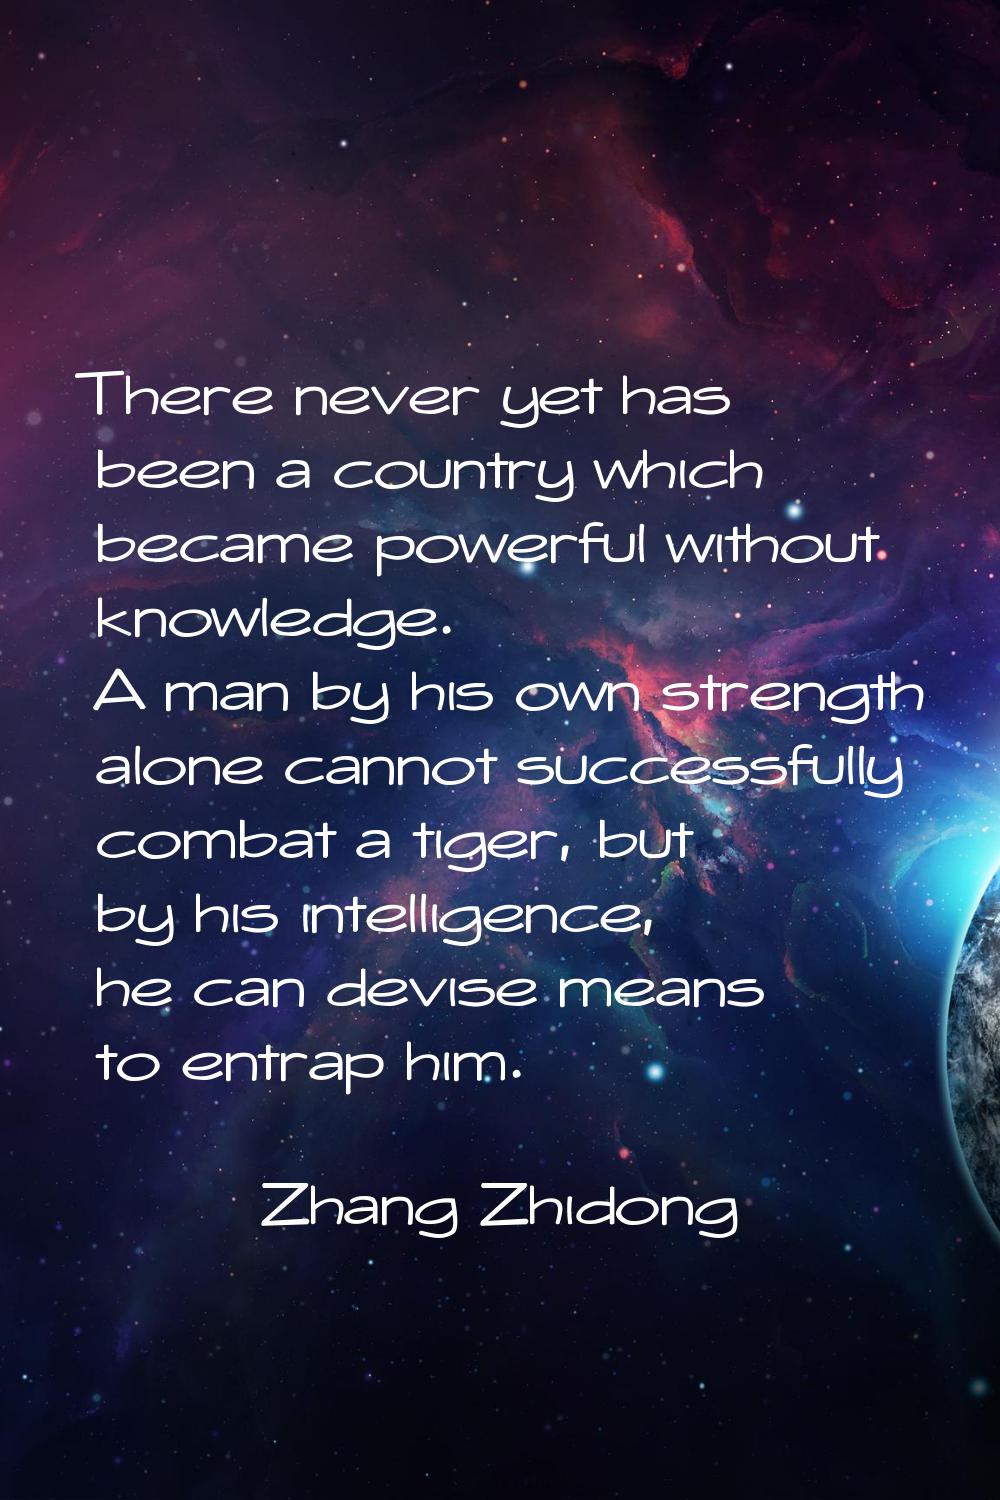 There never yet has been a country which became powerful without knowledge. A man by his own streng